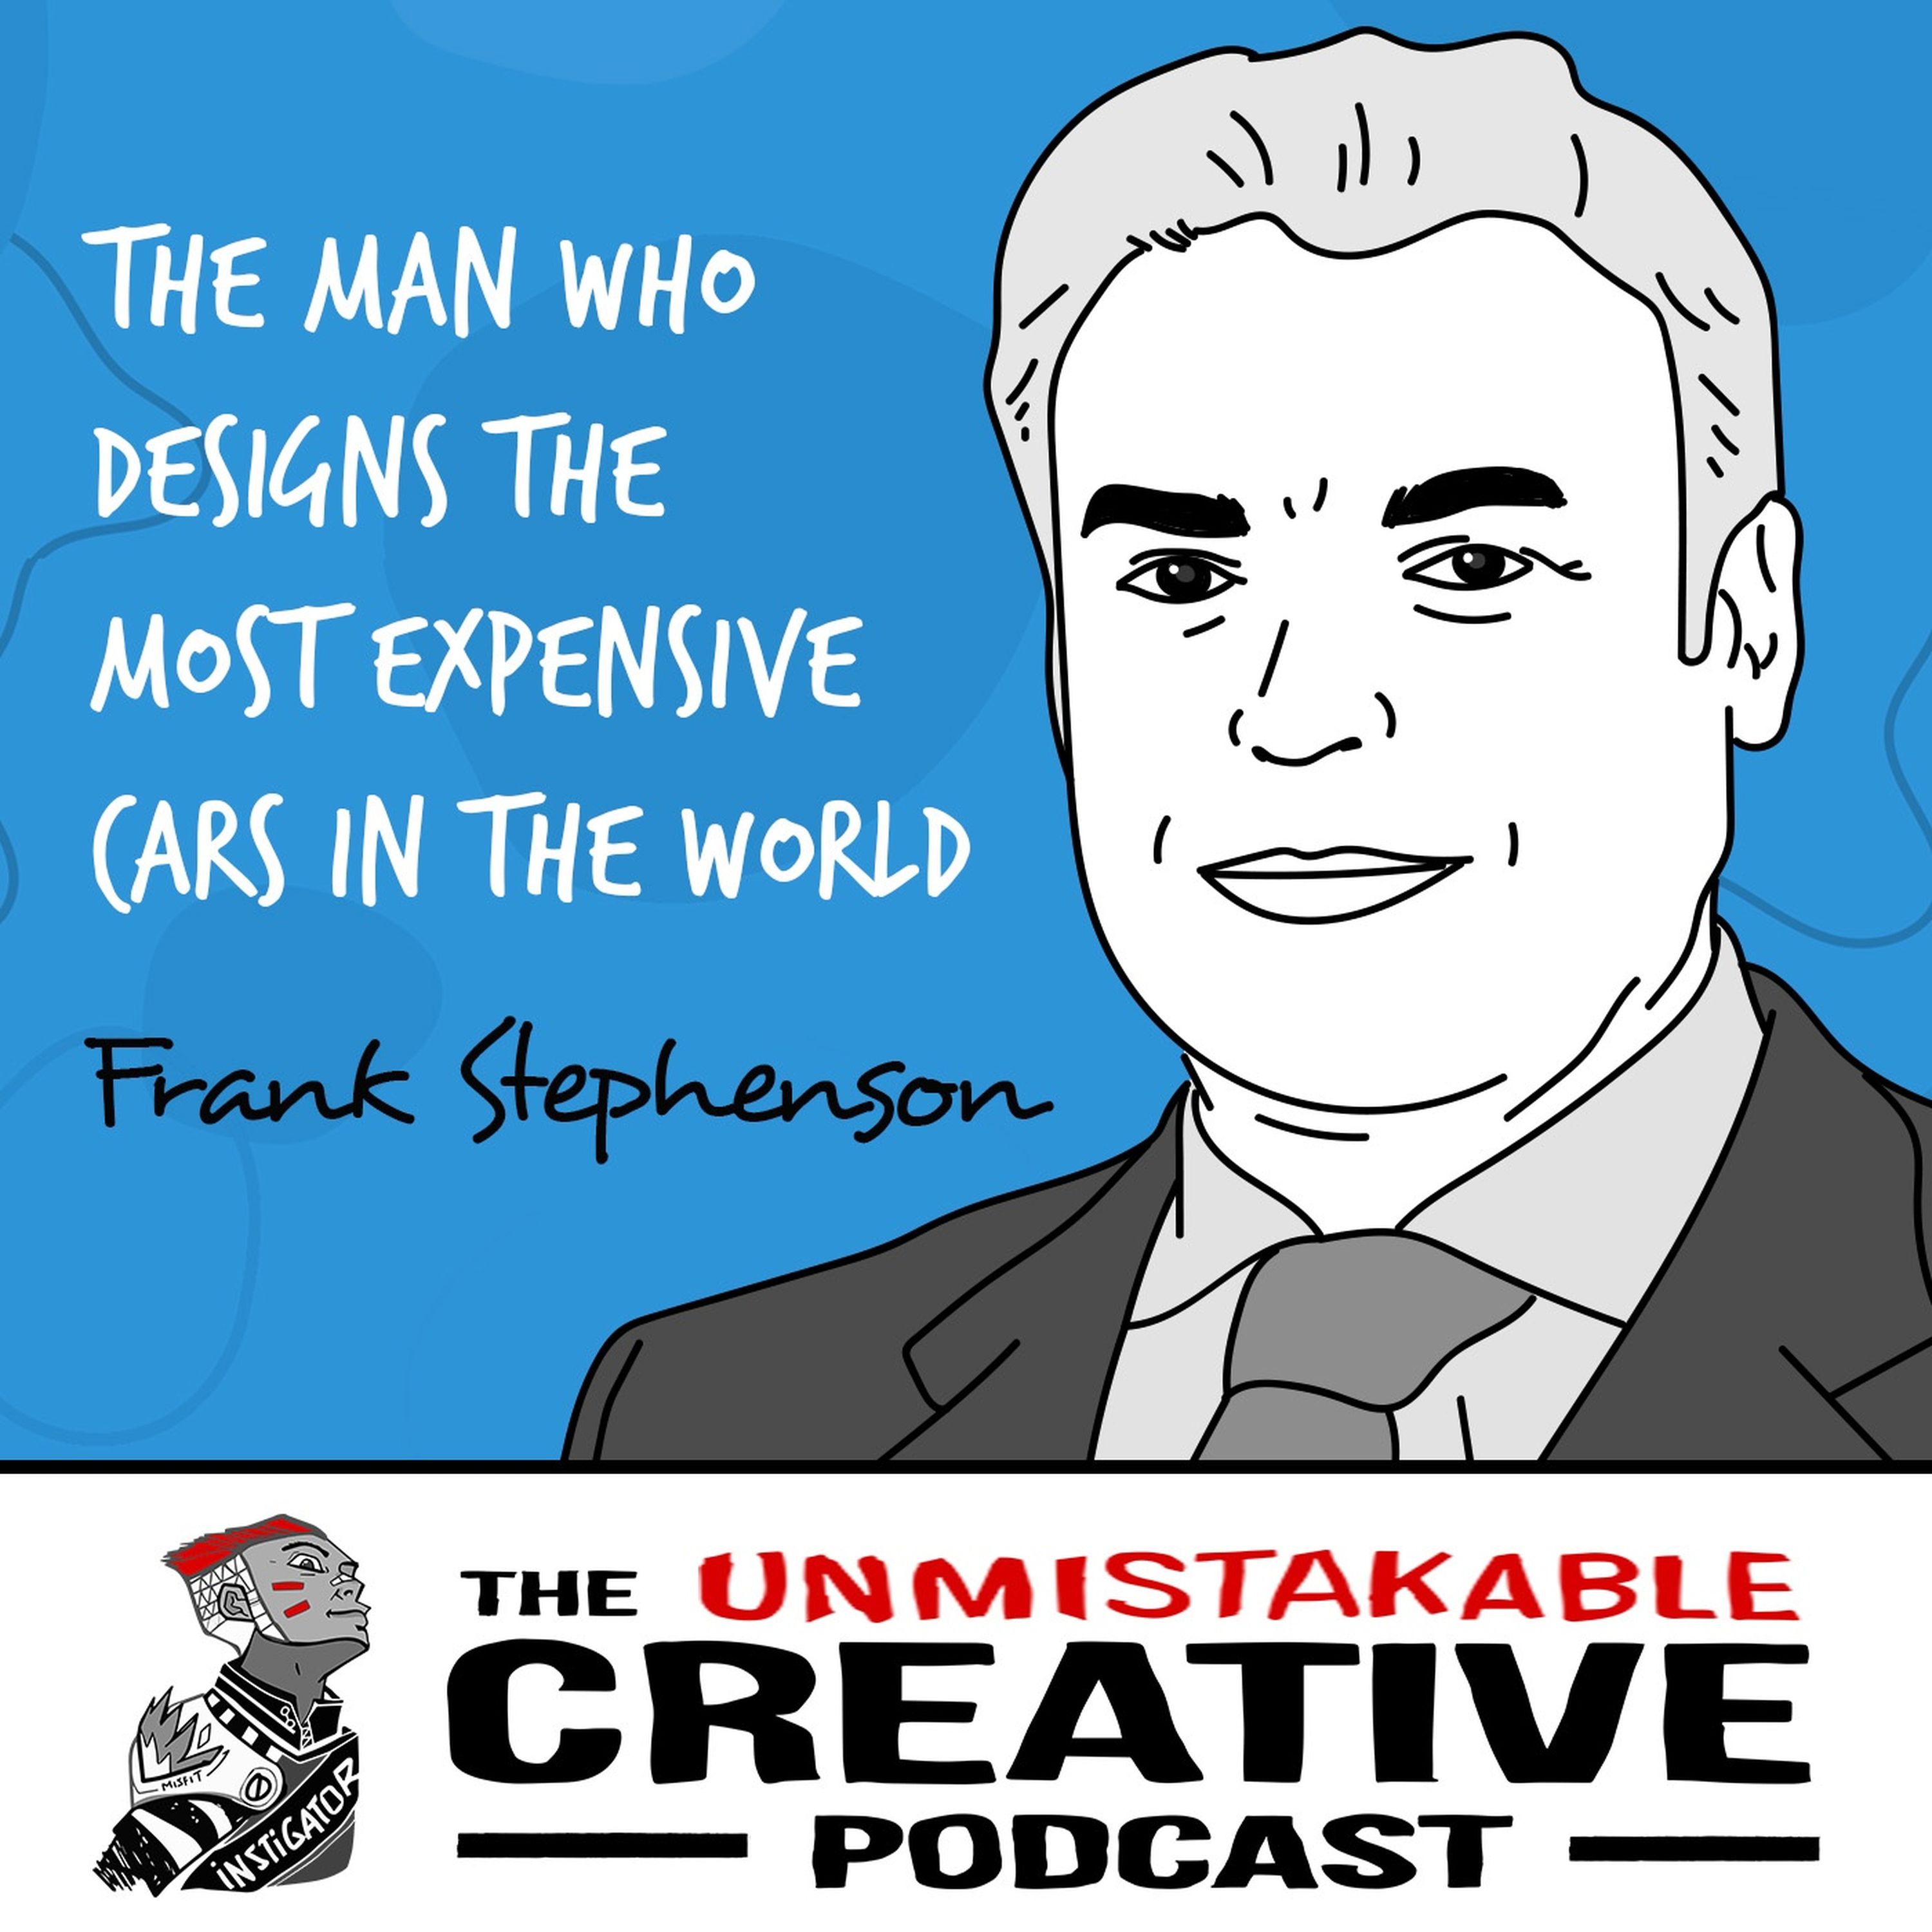 Frank Stephenson: The Man Who Designs the Most Expensive Cars in The World Image